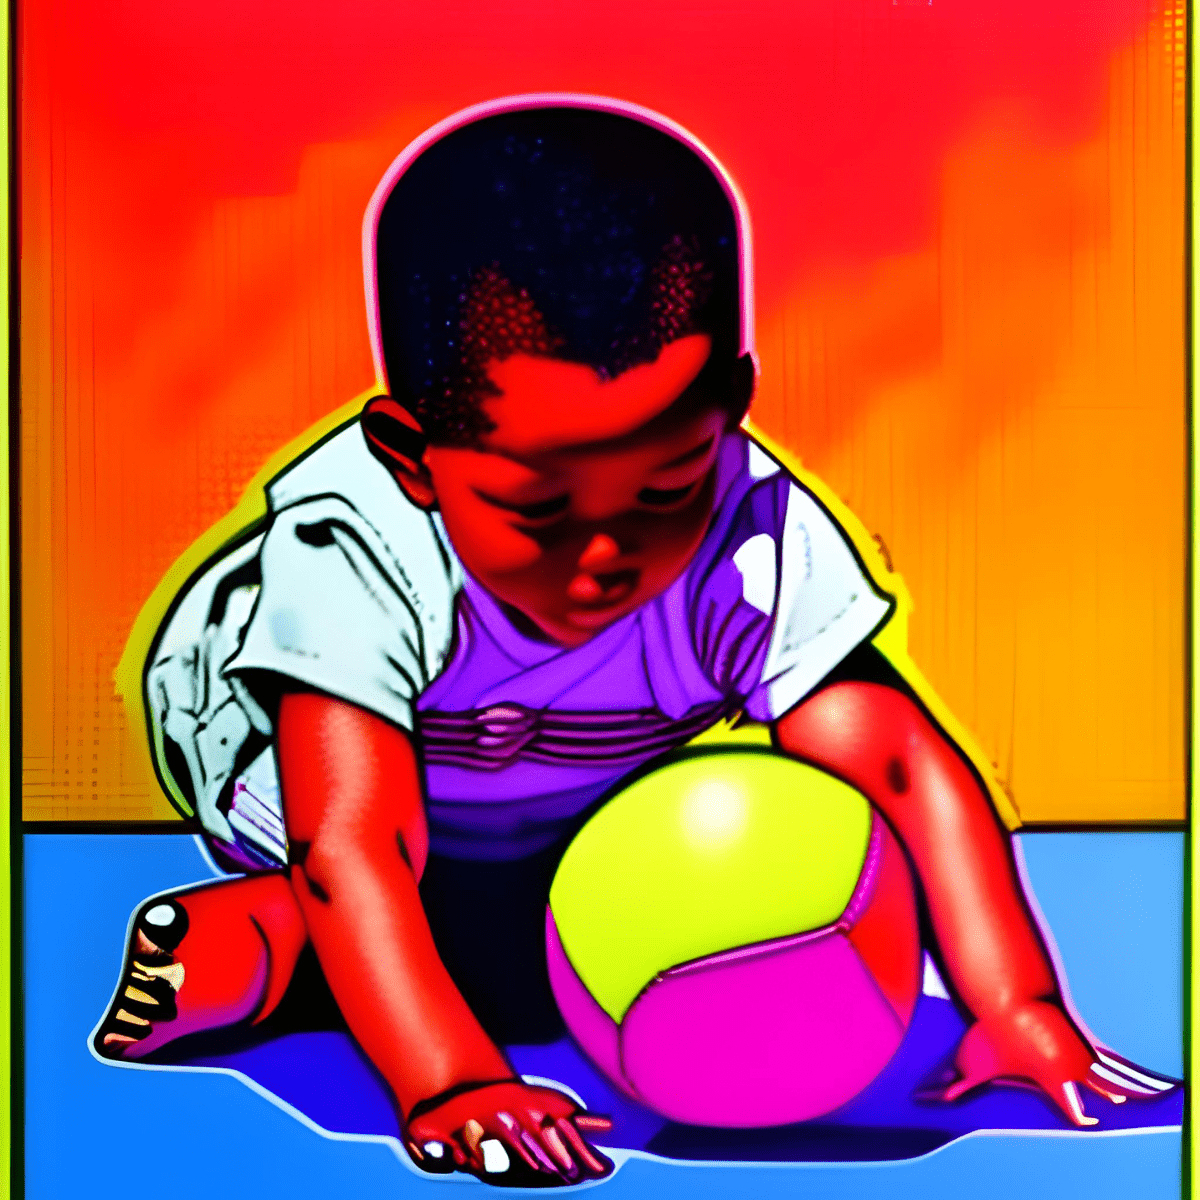 how to prepare for parenthood image. retro cartoon style image - young child on blue floor with orange & yellow background, playing with yellow, pink, & red ball